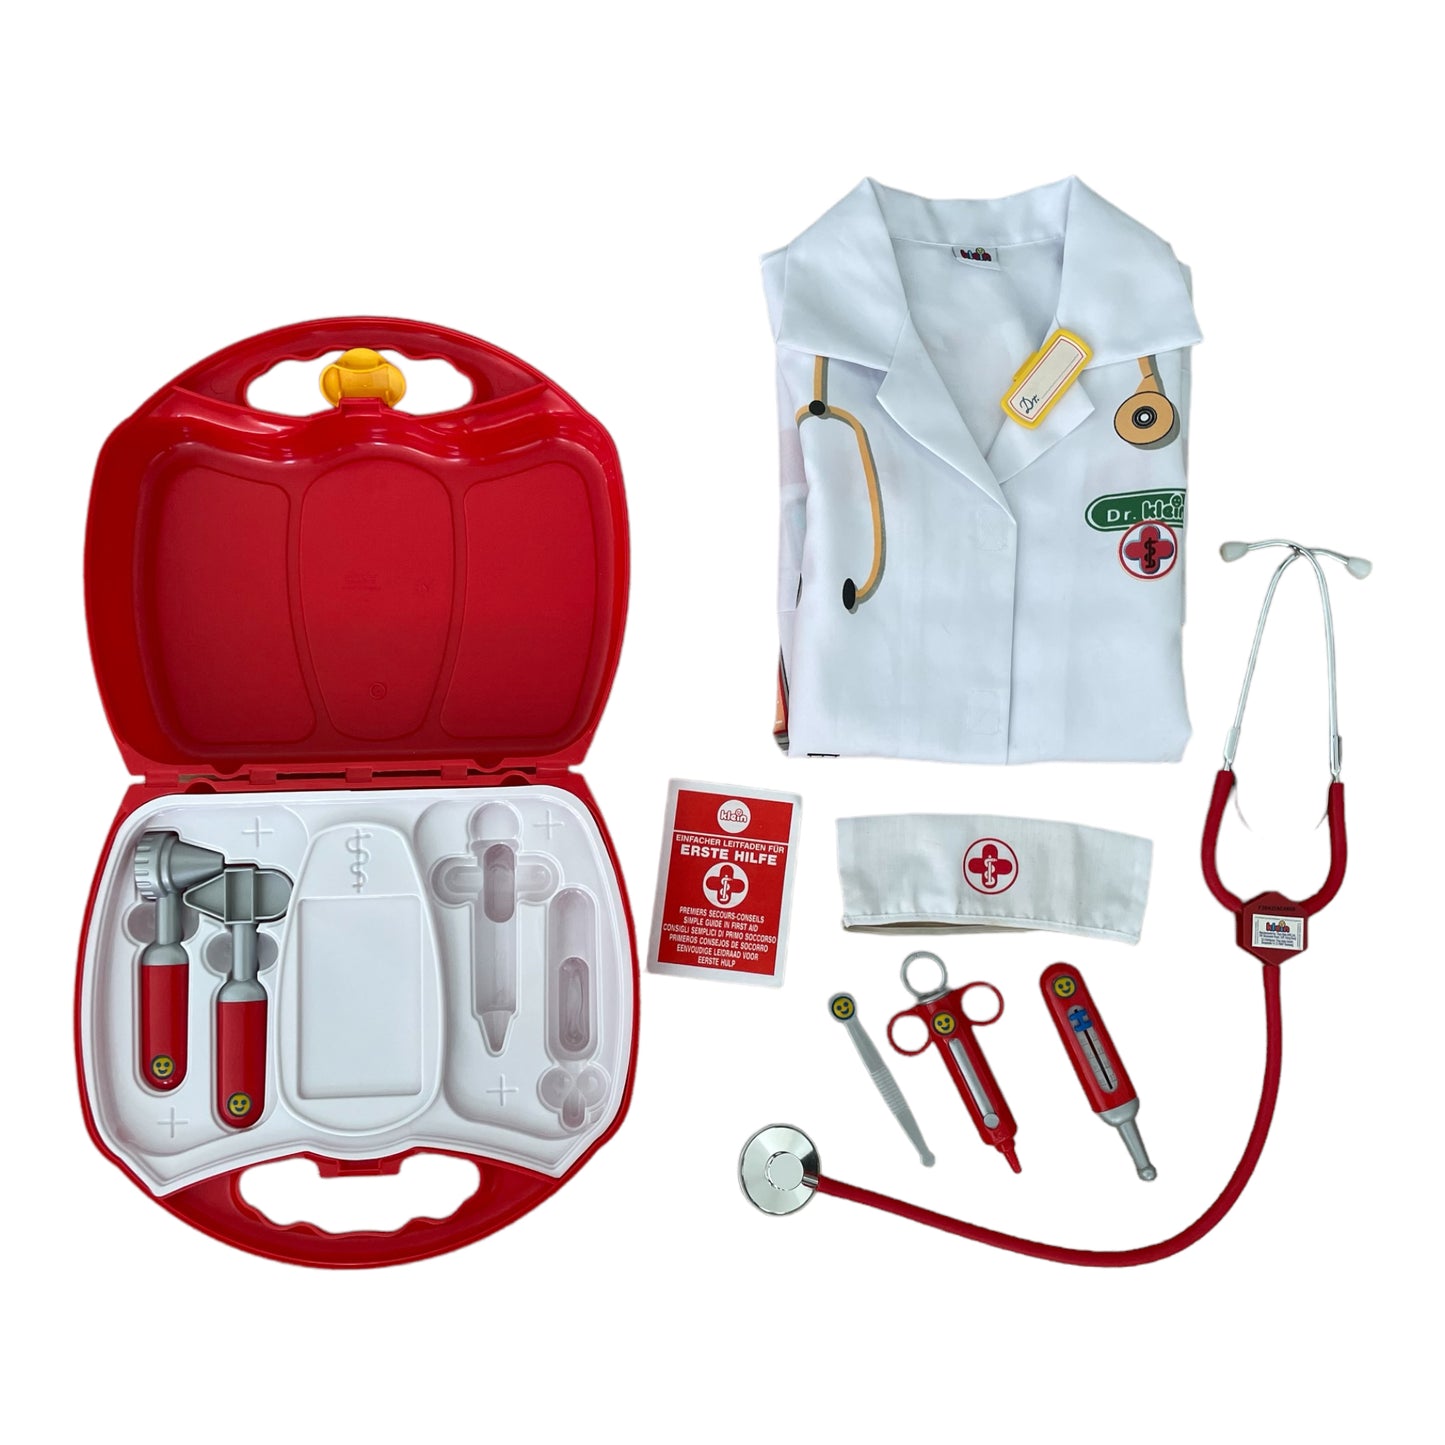 Doctor's bag with Mobile phone and Real stethoscope - Deluxe version